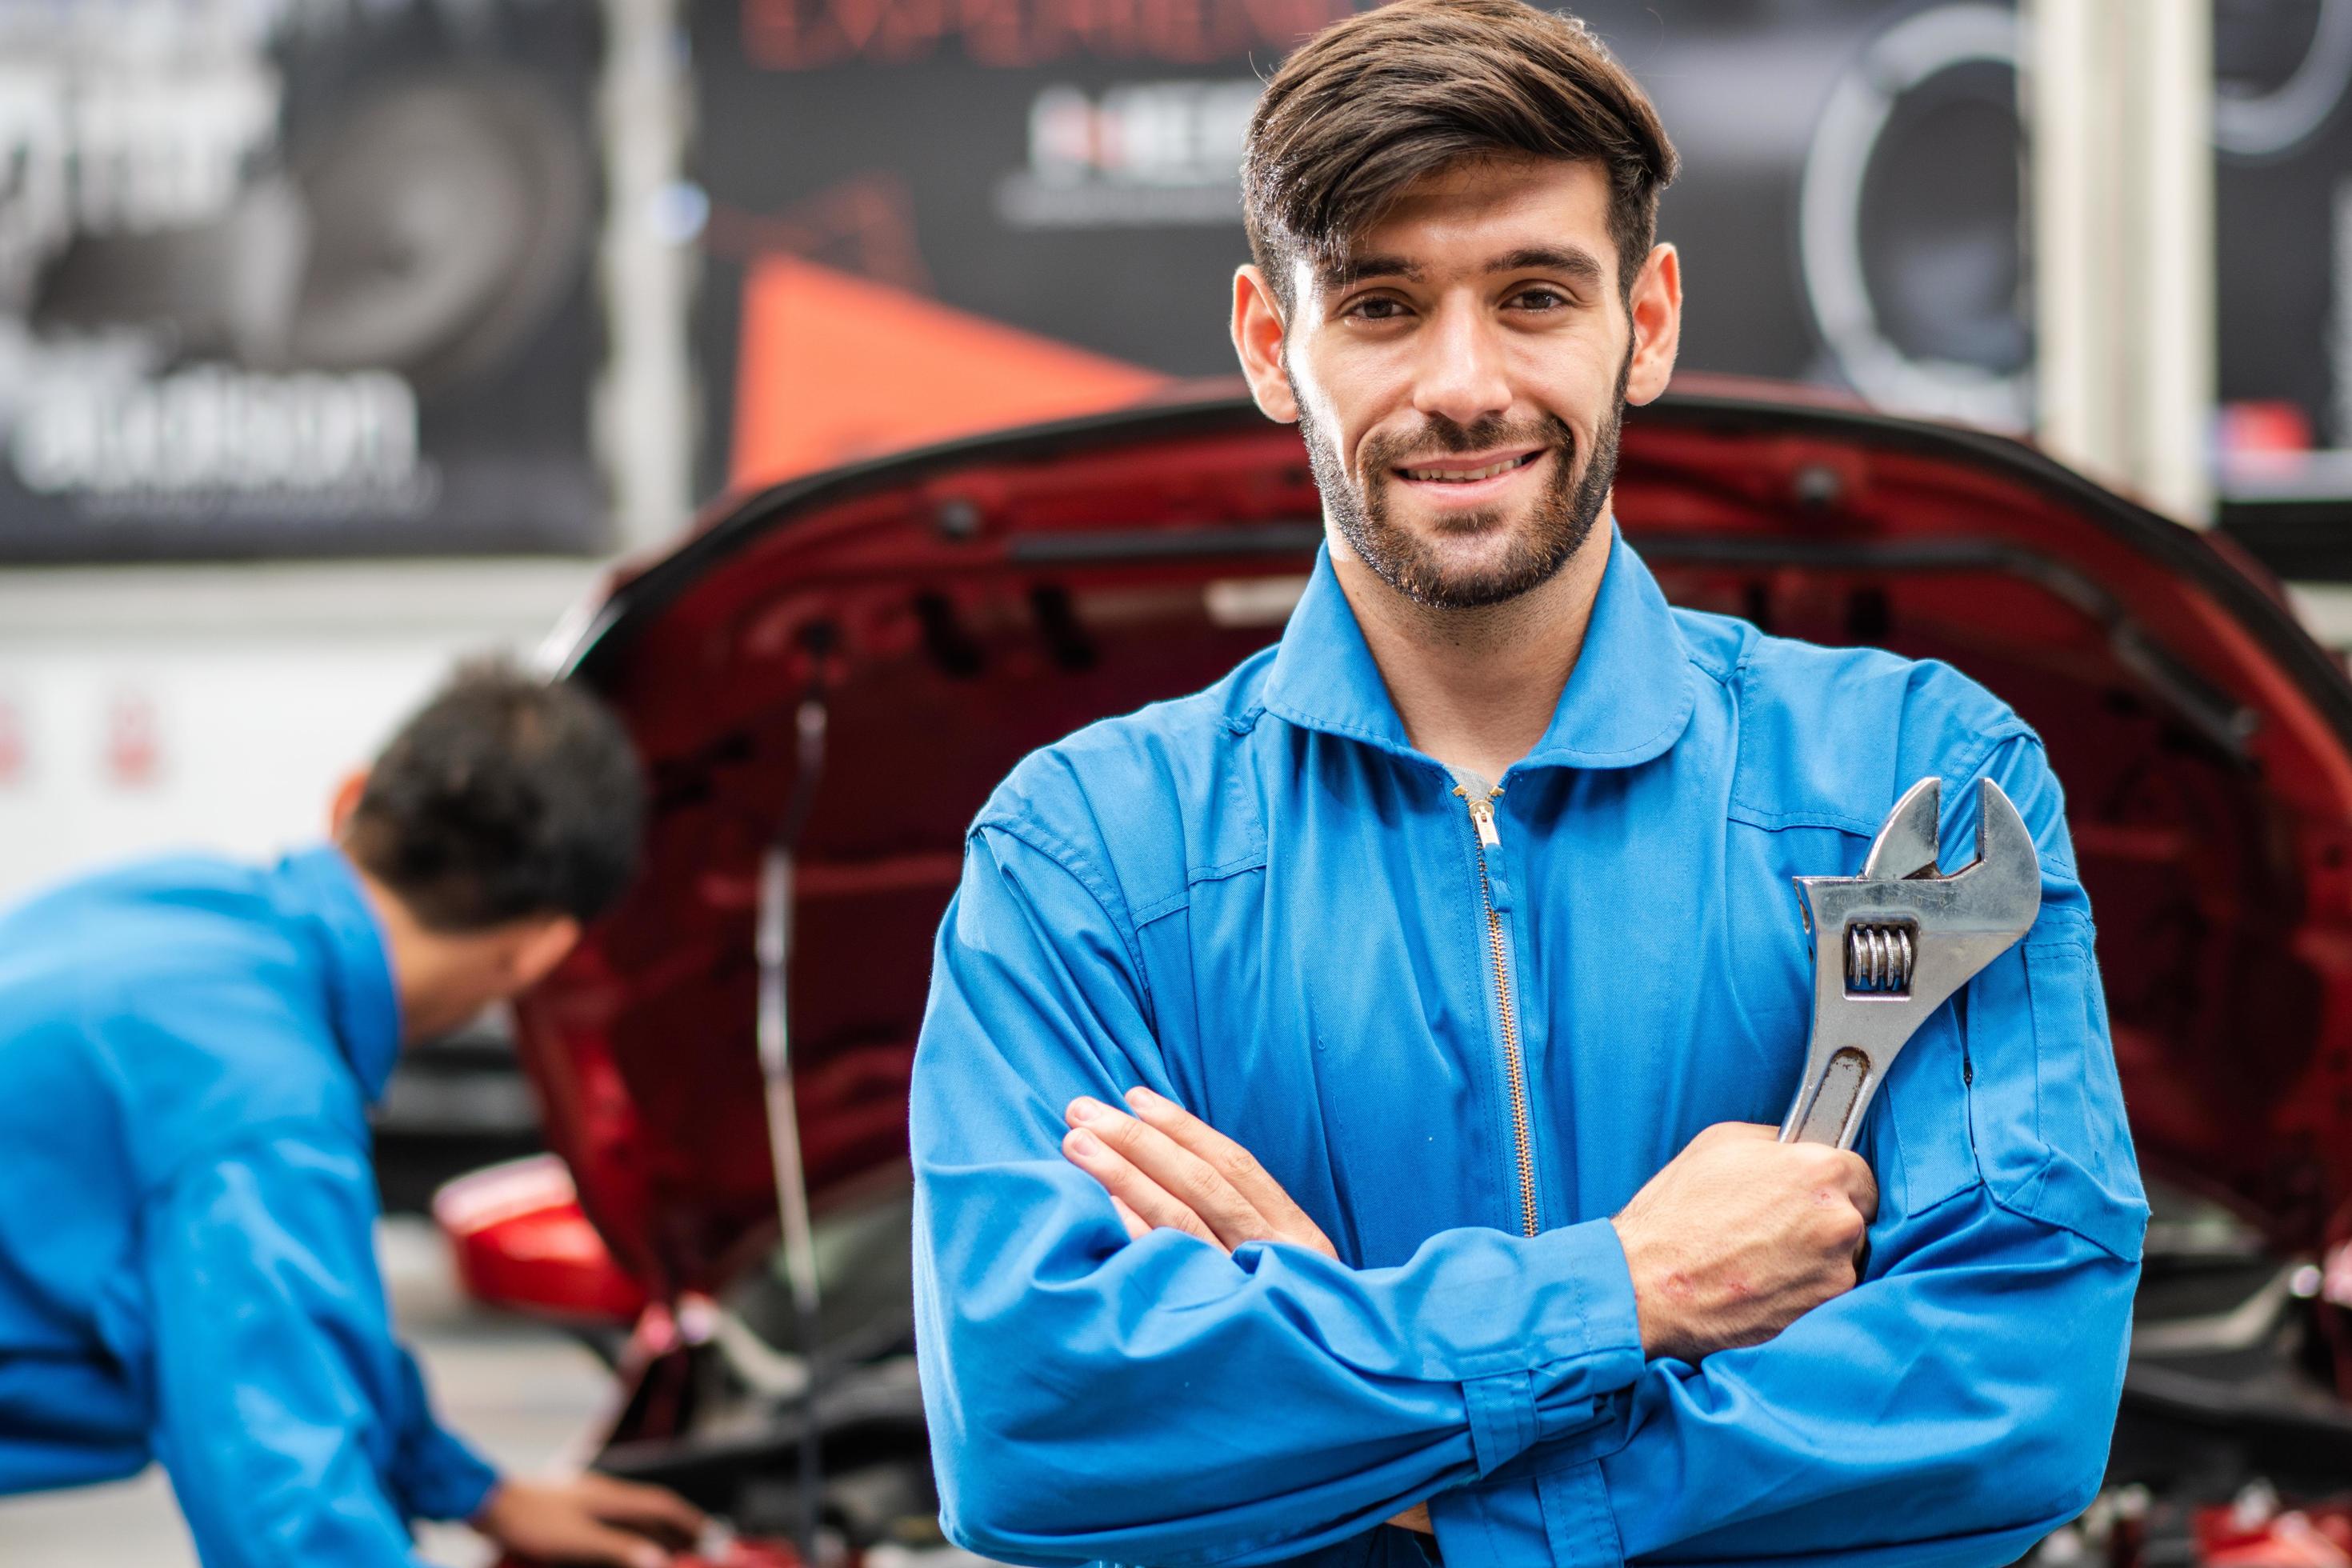 https://static.vecteezy.com/system/resources/previews/006/948/114/large_2x/portrait-of-caucasian-automotive-mechanic-man-holding-wrench-assistant-worker-repairing-car-checking-auto-damage-in-auto-garage-transport-business-and-after-service-concept-free-photo.jpg